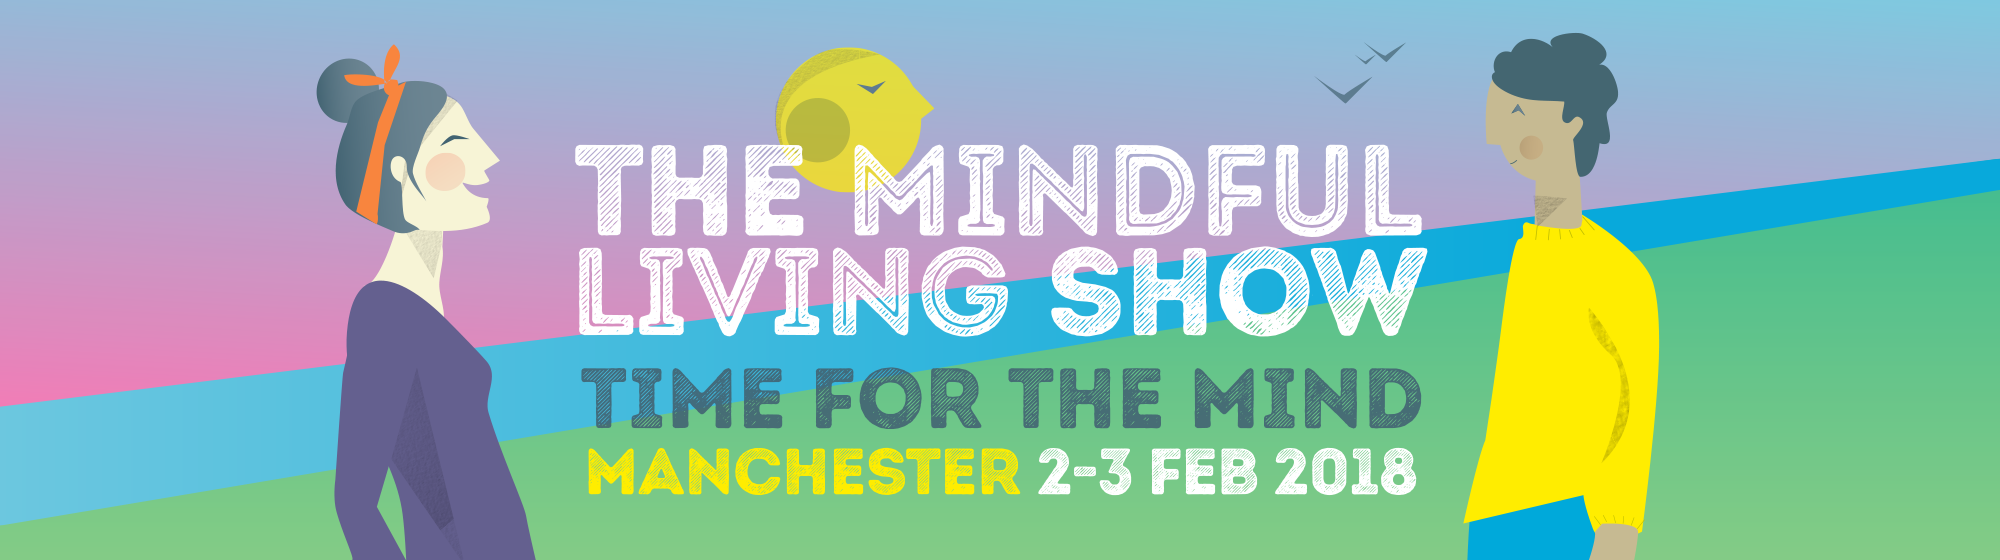 WIN! A PAIR OF TICKETS TO THE MINDFUL LIVING SHOW.